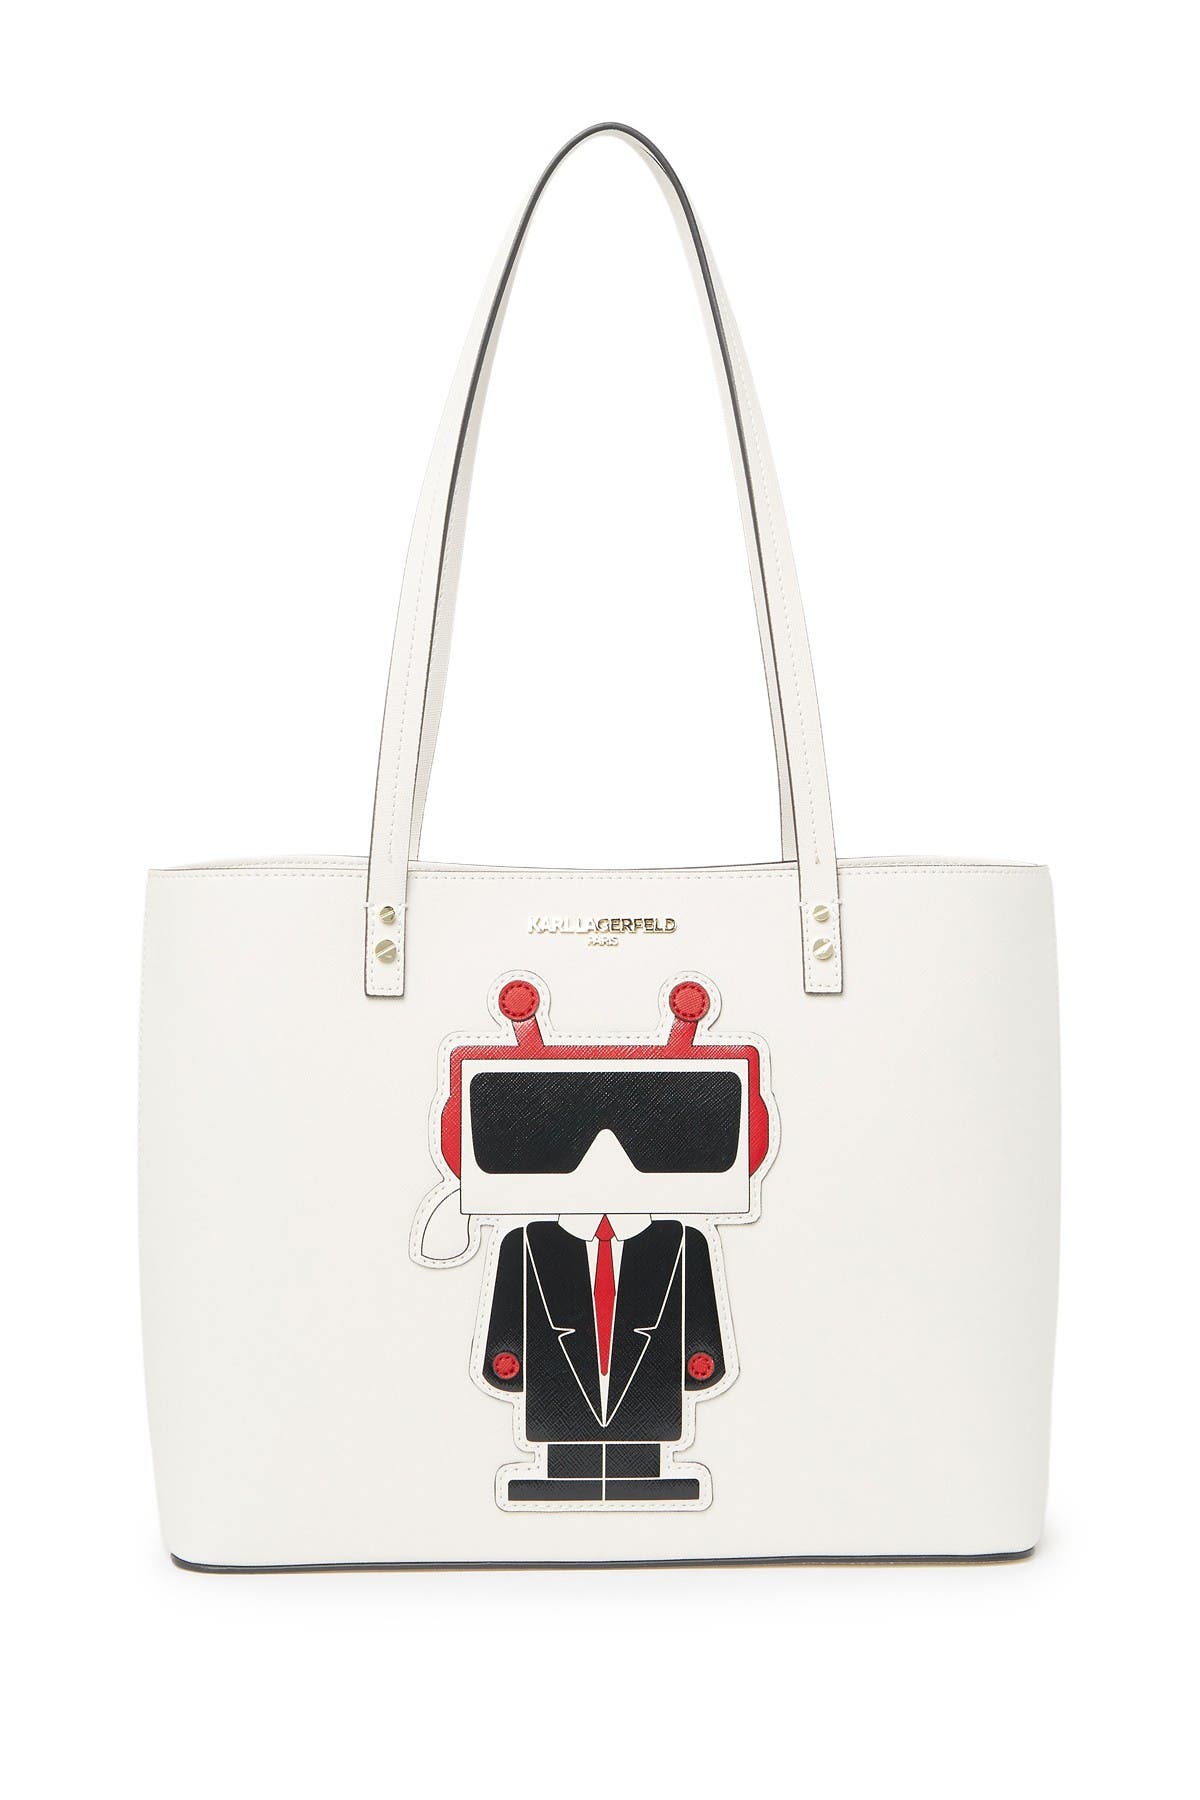 Karl Lagerfeld Maybelle Tote Bag In Open White79